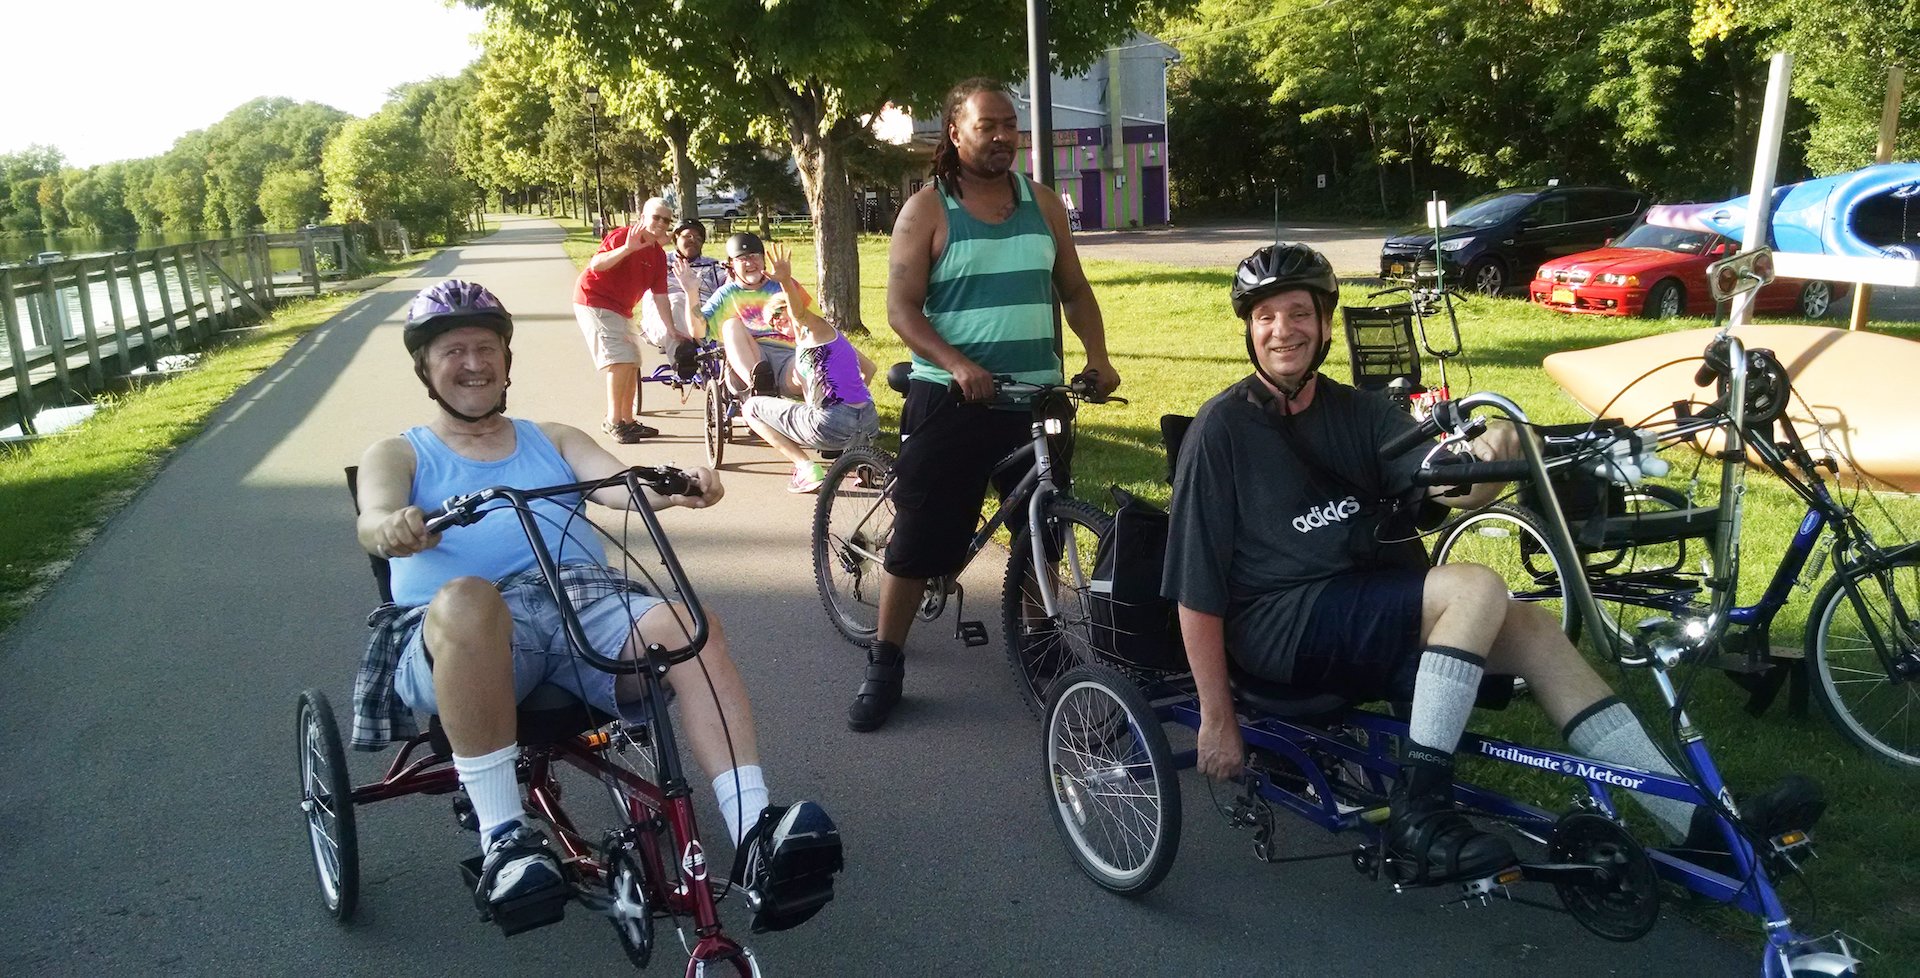 Six people are lined up on a paved Canal pathway. Several of them are on adaptive three-wheeled bikes, wearing helmets, and smiling.